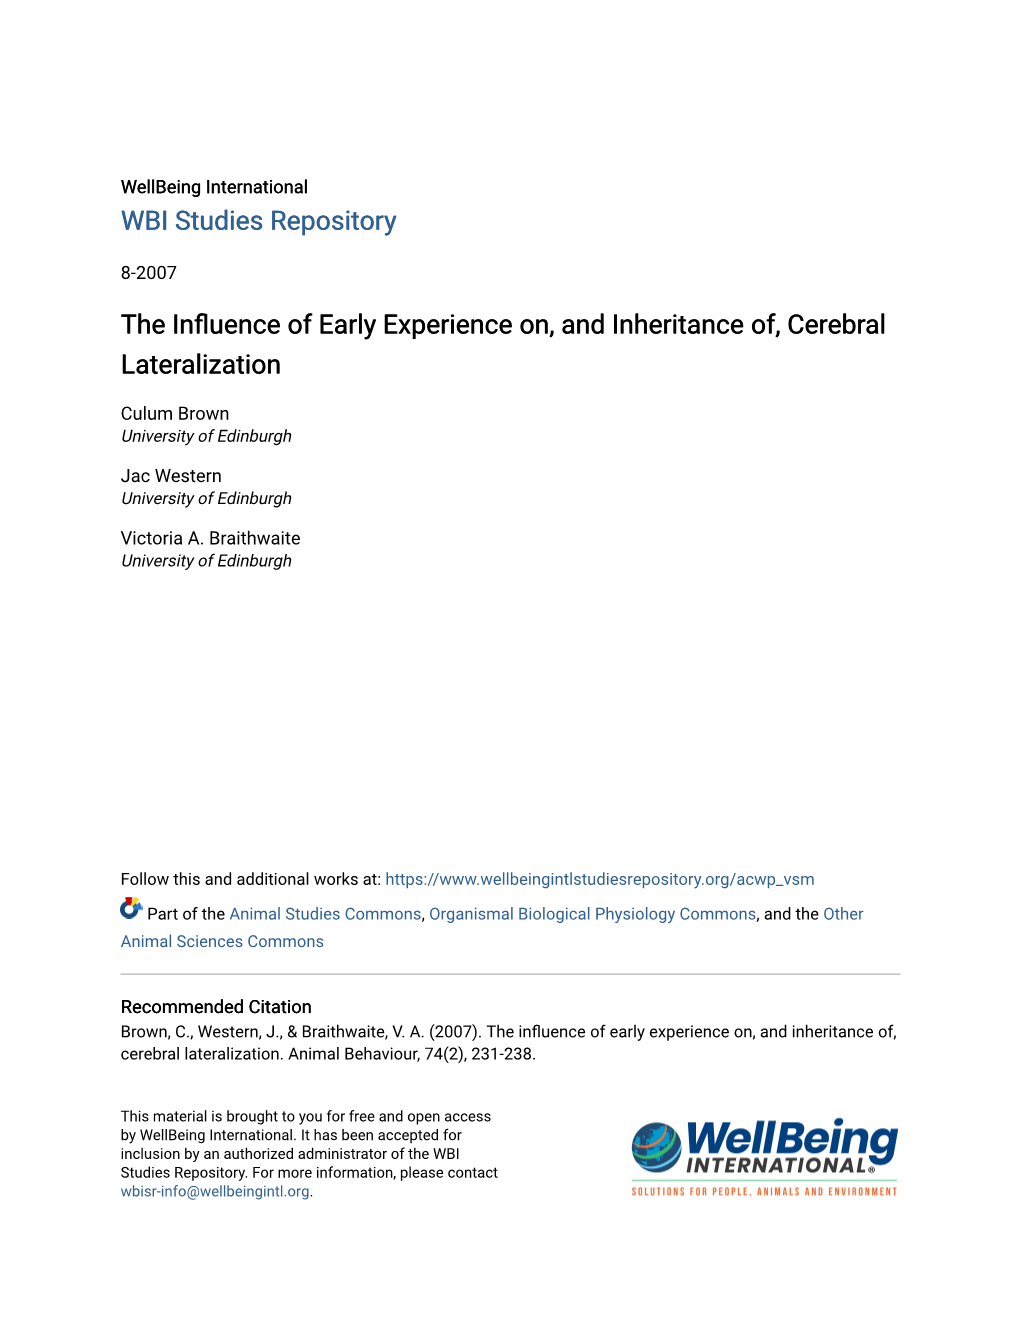 The Influence of Early Experience On, and Inheritance Of, Cerebral Lateralization